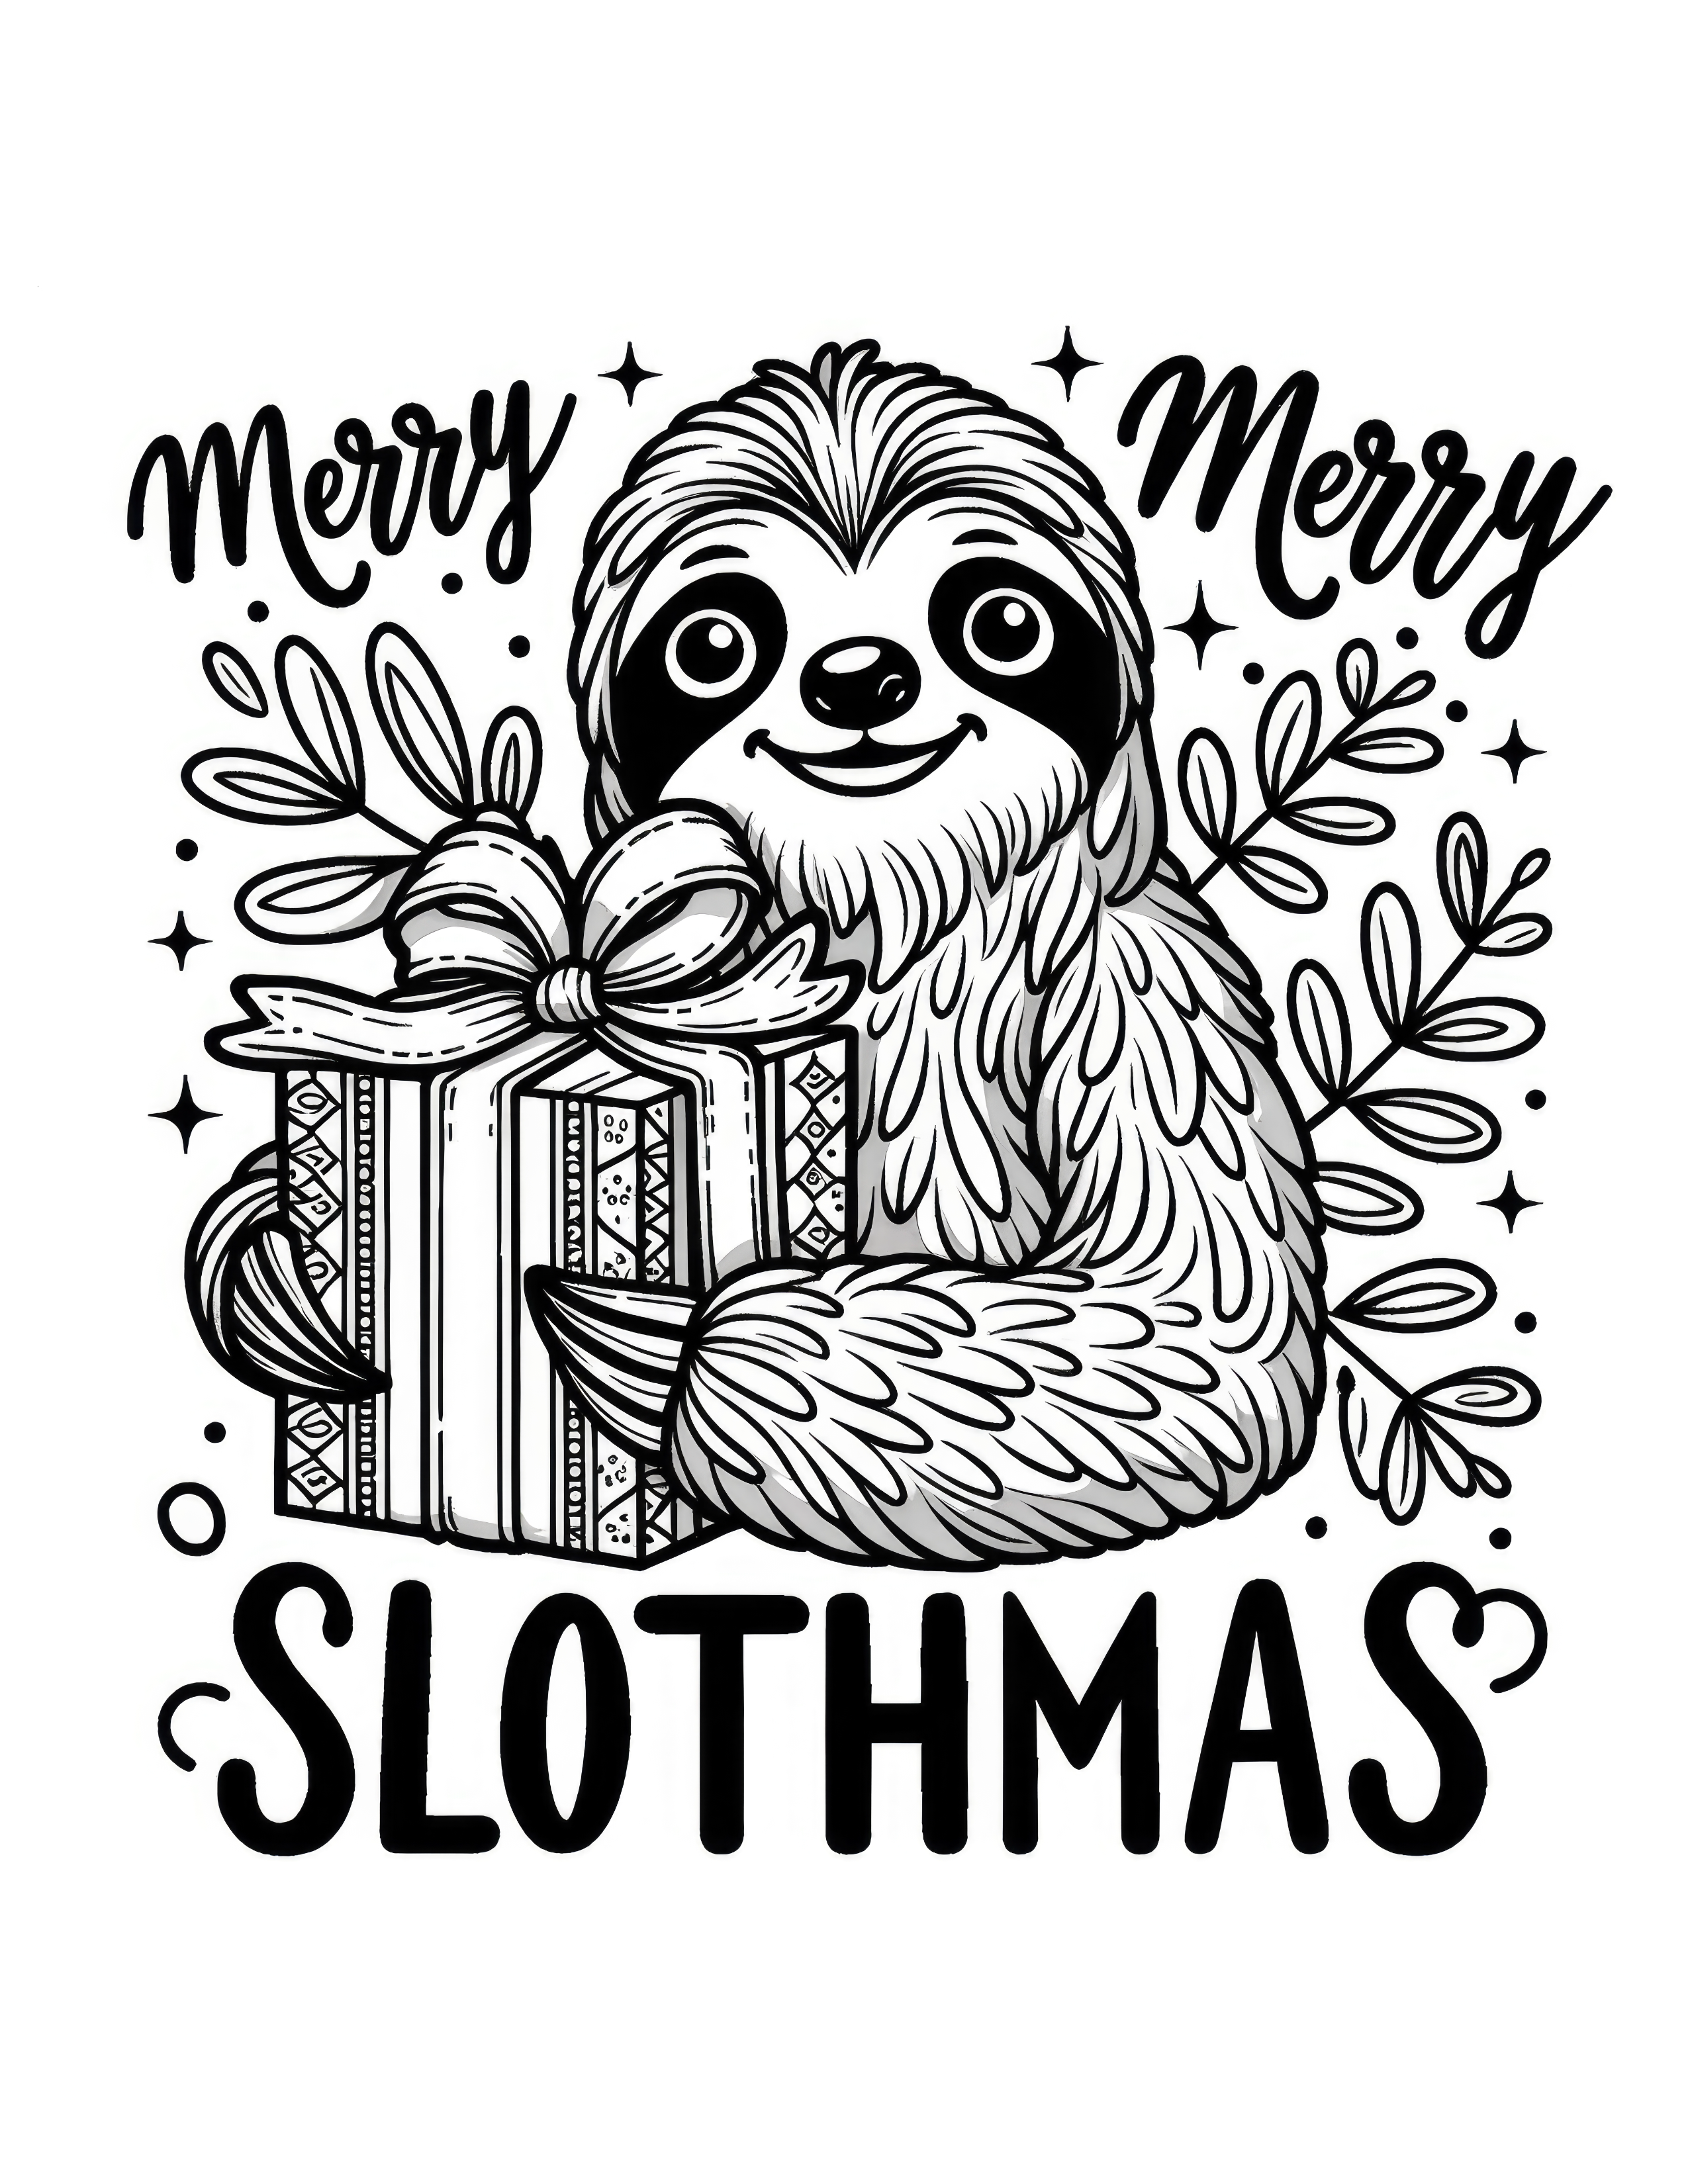 Merry Merry Slothmas Coloring Page